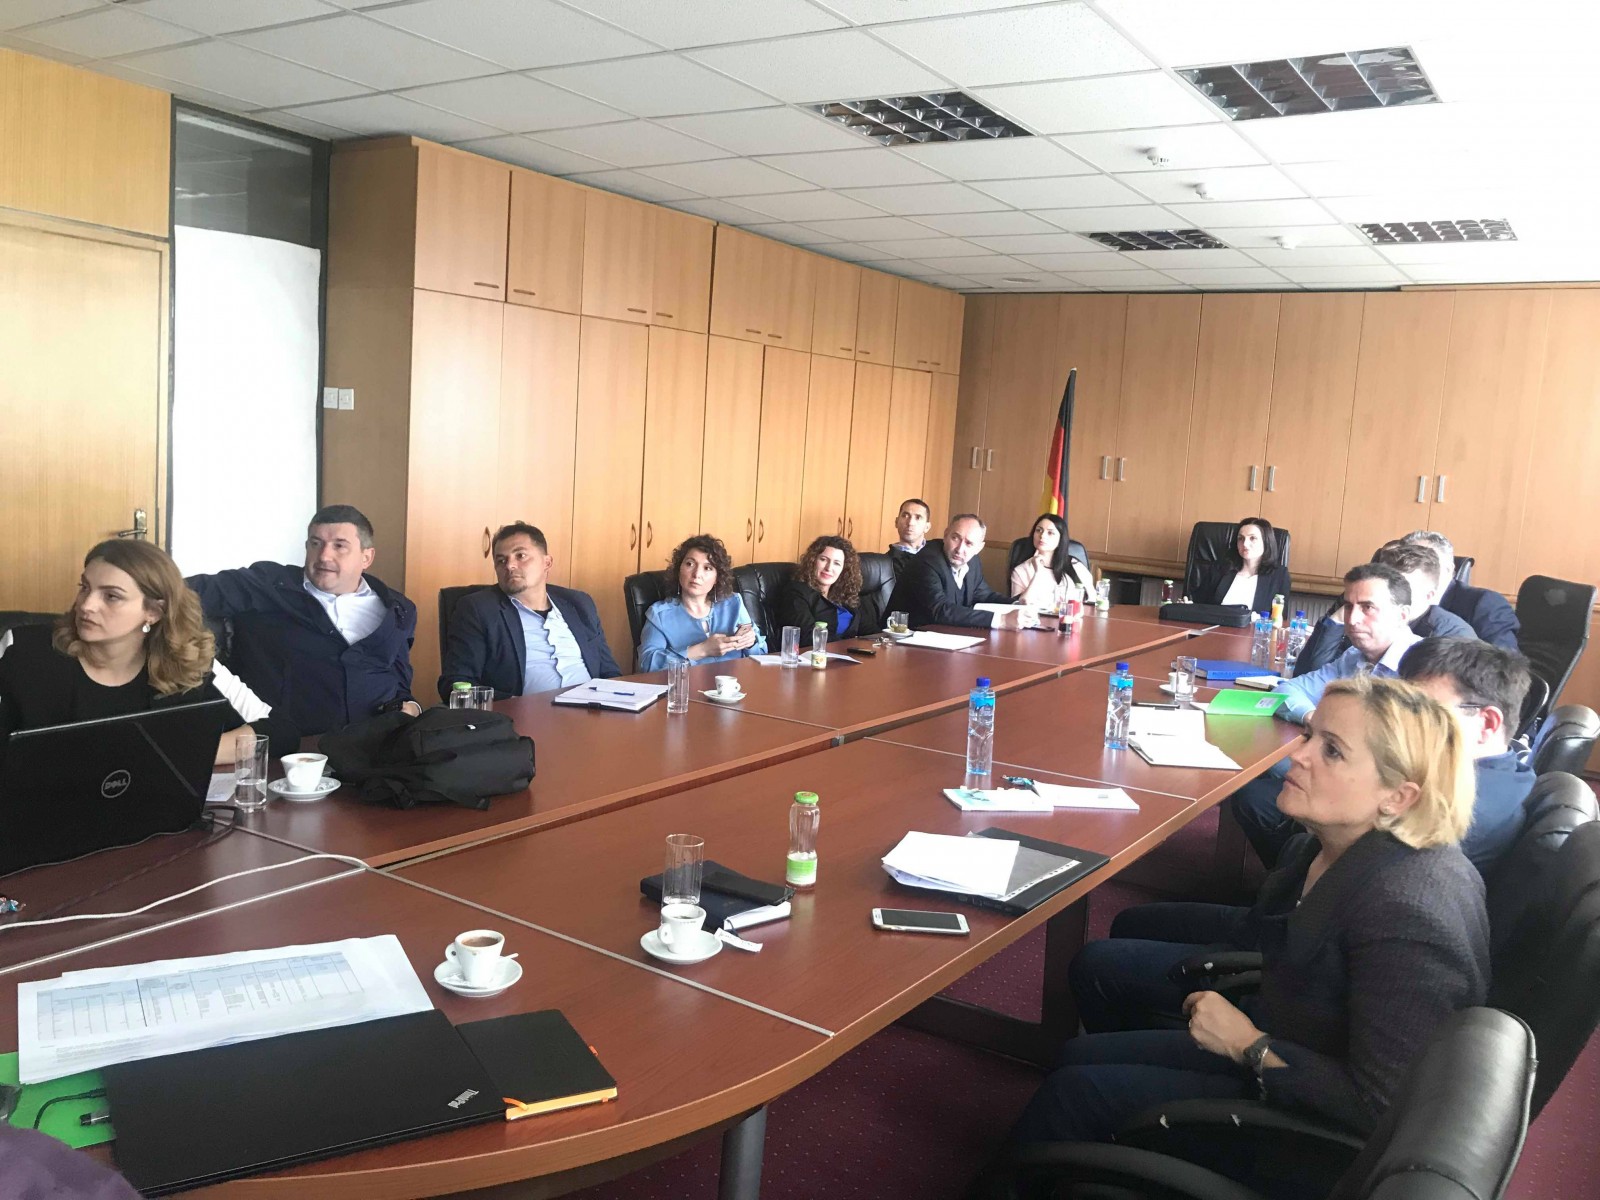 Visit of Project Manager "Asset Management - Advisory Services for South East European Countries" and representatives of Hydro-Comp Company in Pristina